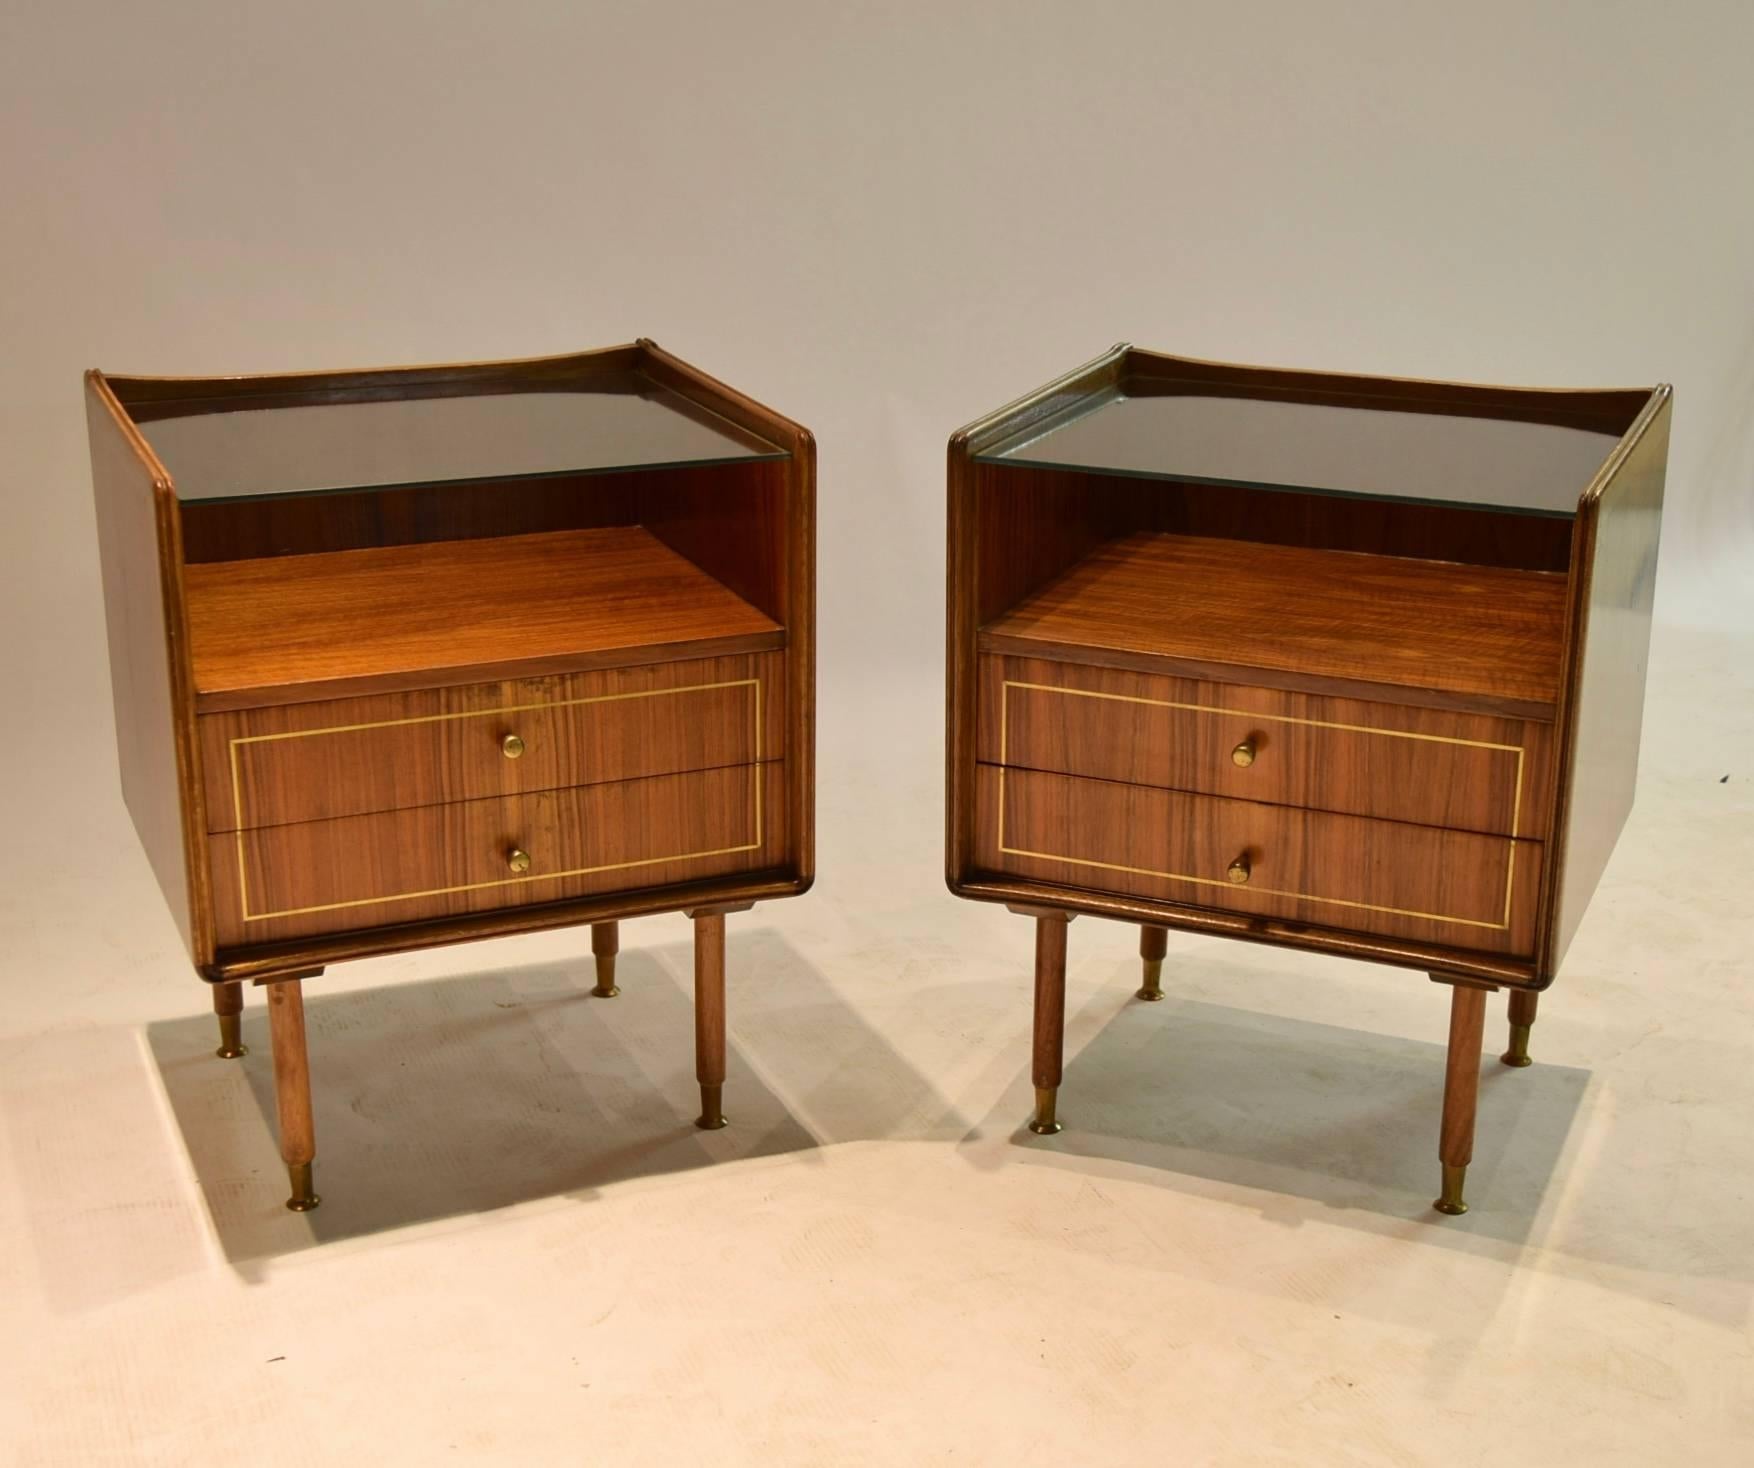 Pair of two-drawer, two-toned gloss finished wooden night stands / night tables each with brass pulls, linear, inset brass accents on the pull-out drawers, teal paper lining with a white atomic print, a clear glass top allowing for a top shelf and